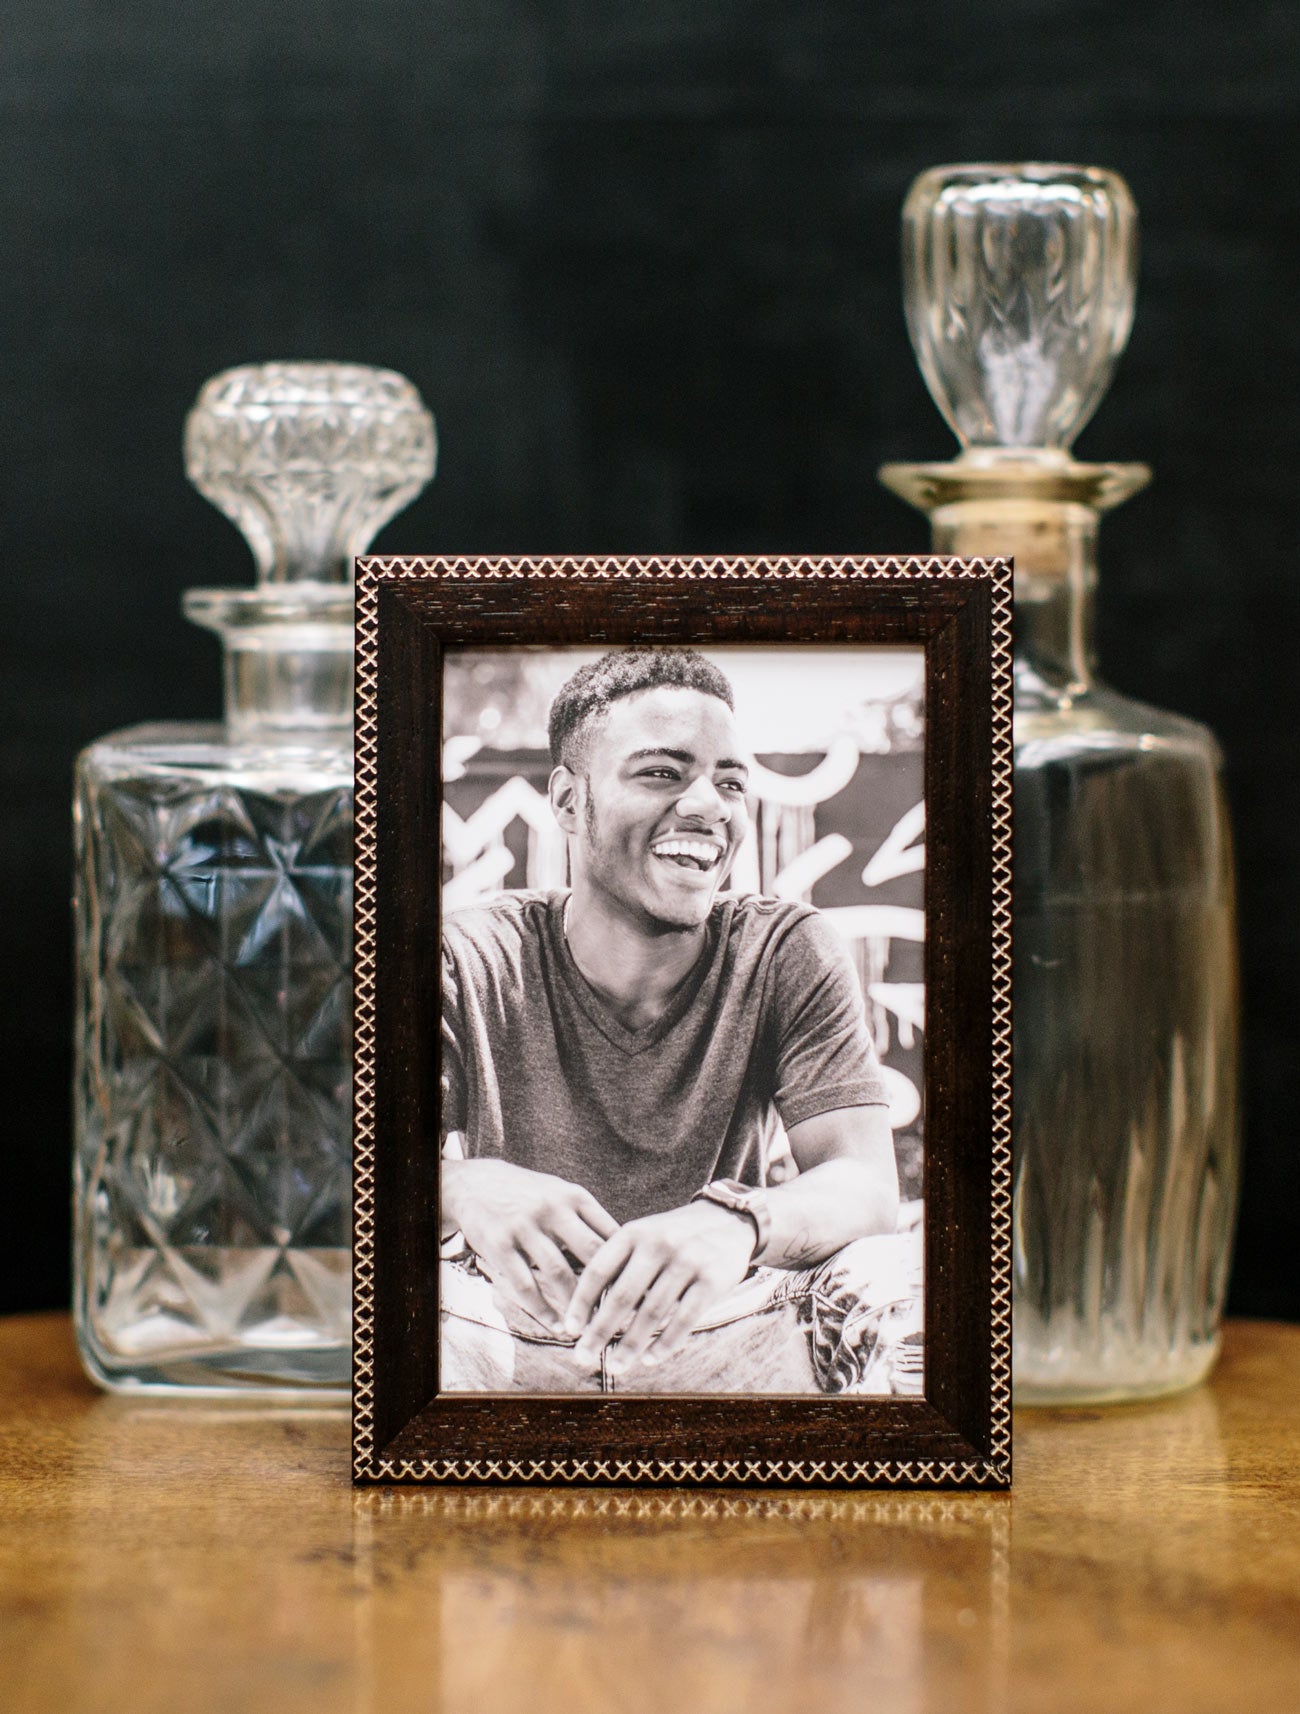 Jax Brown 5x7 frame with Gold criss-cross detailing styled with crystal decanters on a tabletop